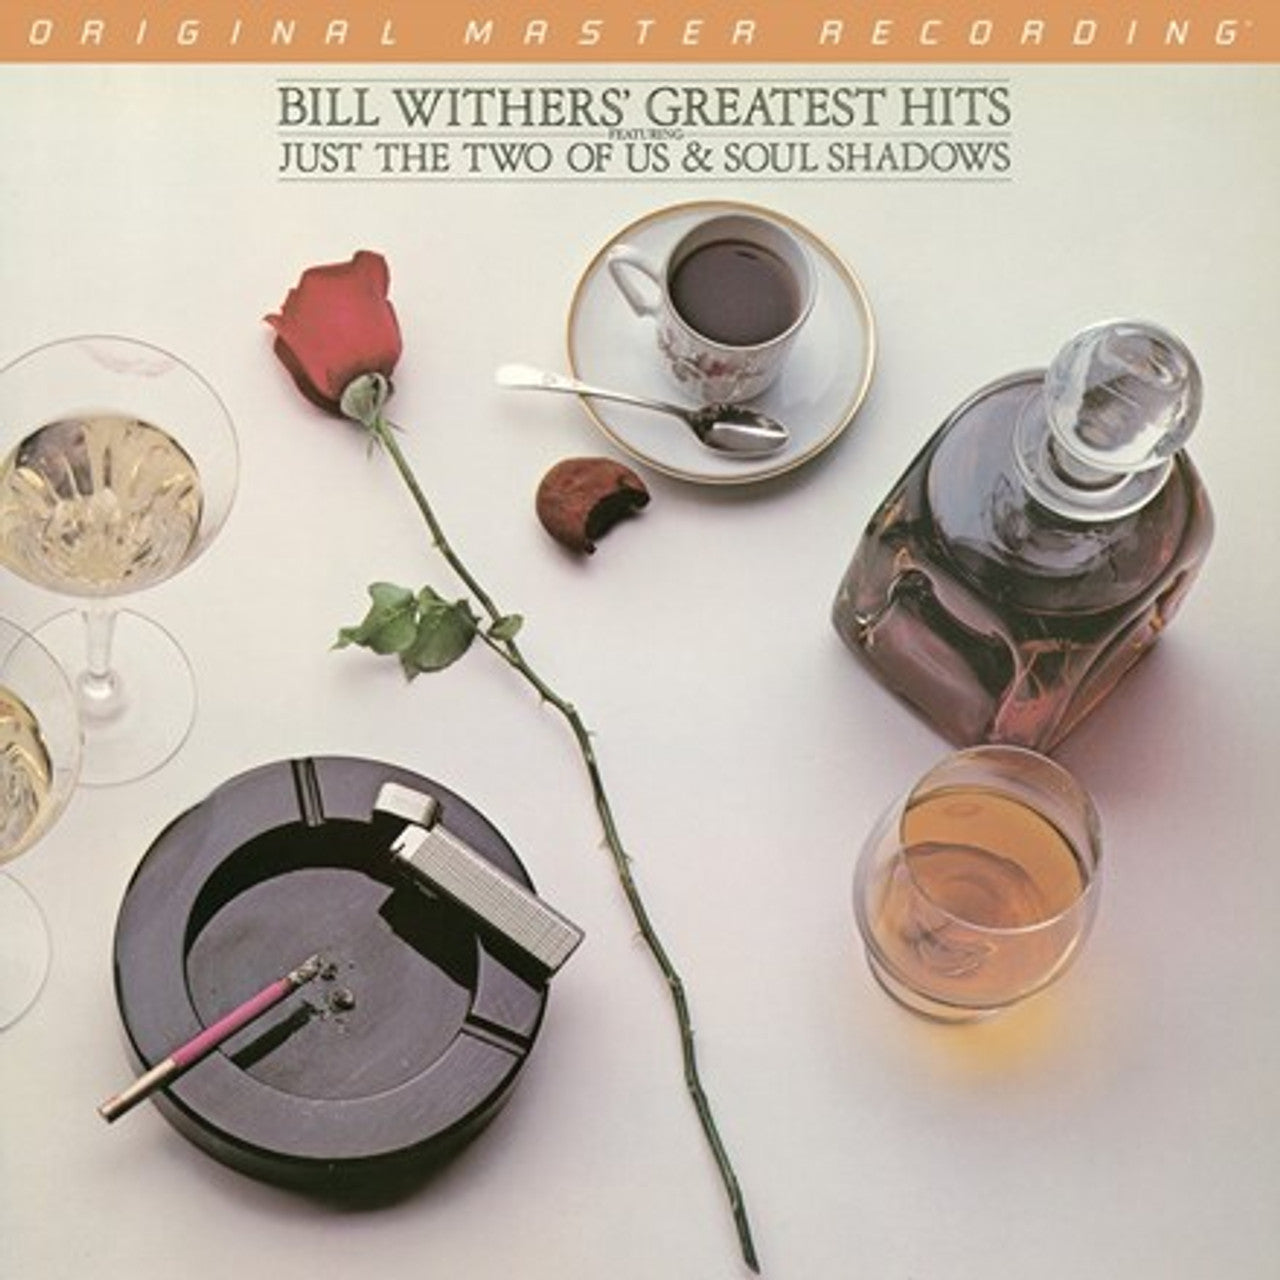 Bill Withers: Greatest Hits Vinyl LP (180 gram)